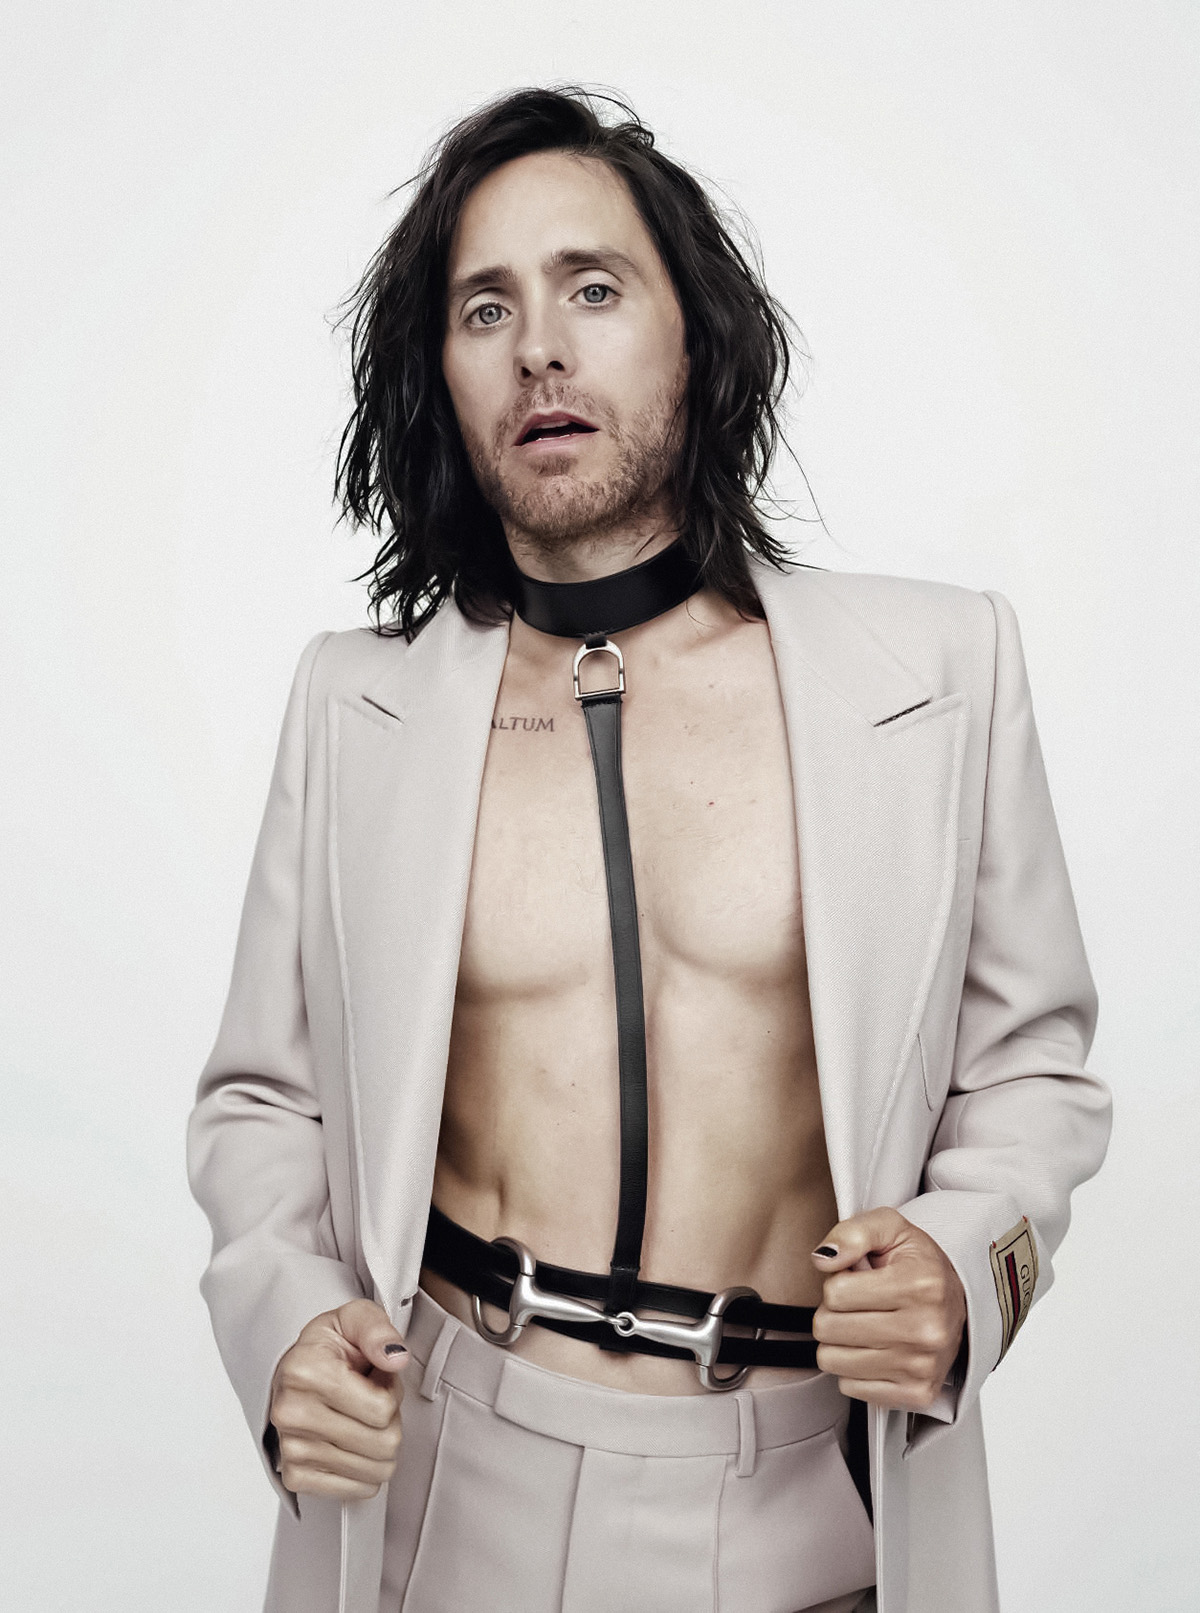 Jared Leto in Gucci on L’Uomo Vogue Issue 13 cover by Willy Vanderperre